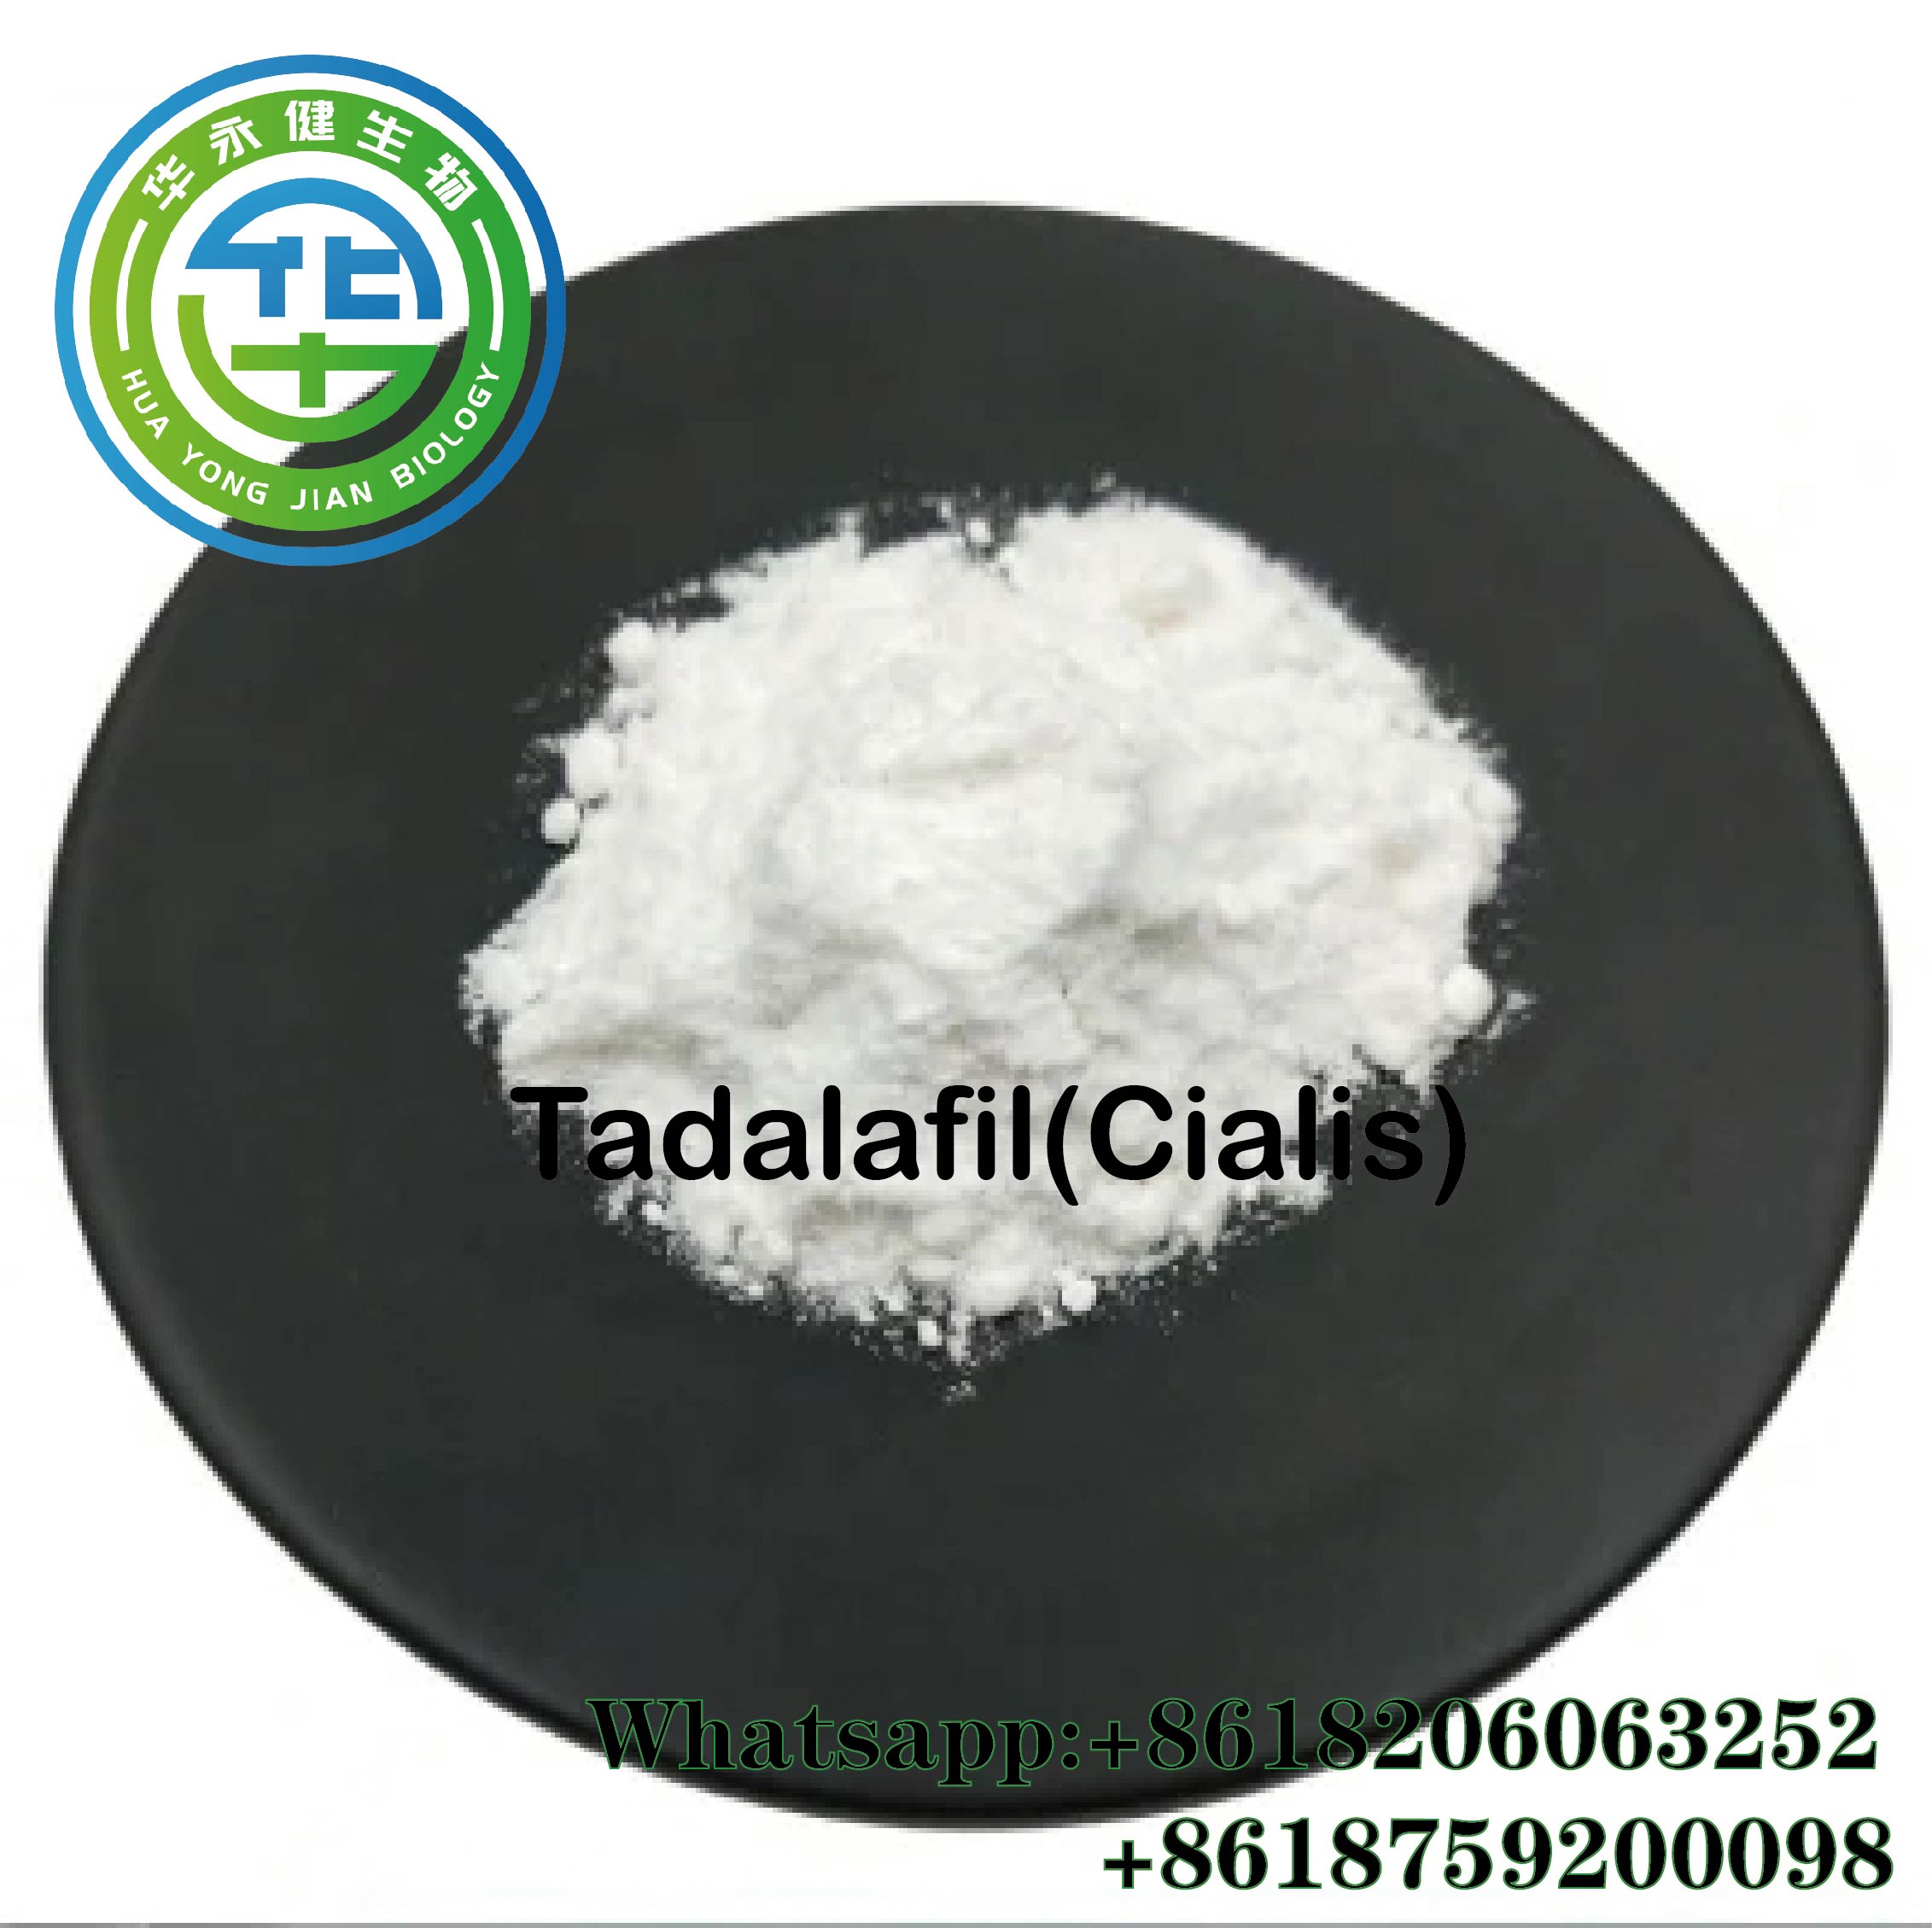 Pharmaceutical Grade Tadalafil Steroids Powder Cialis CasNO.171596-29-5 with 100% Delivery Gurantee